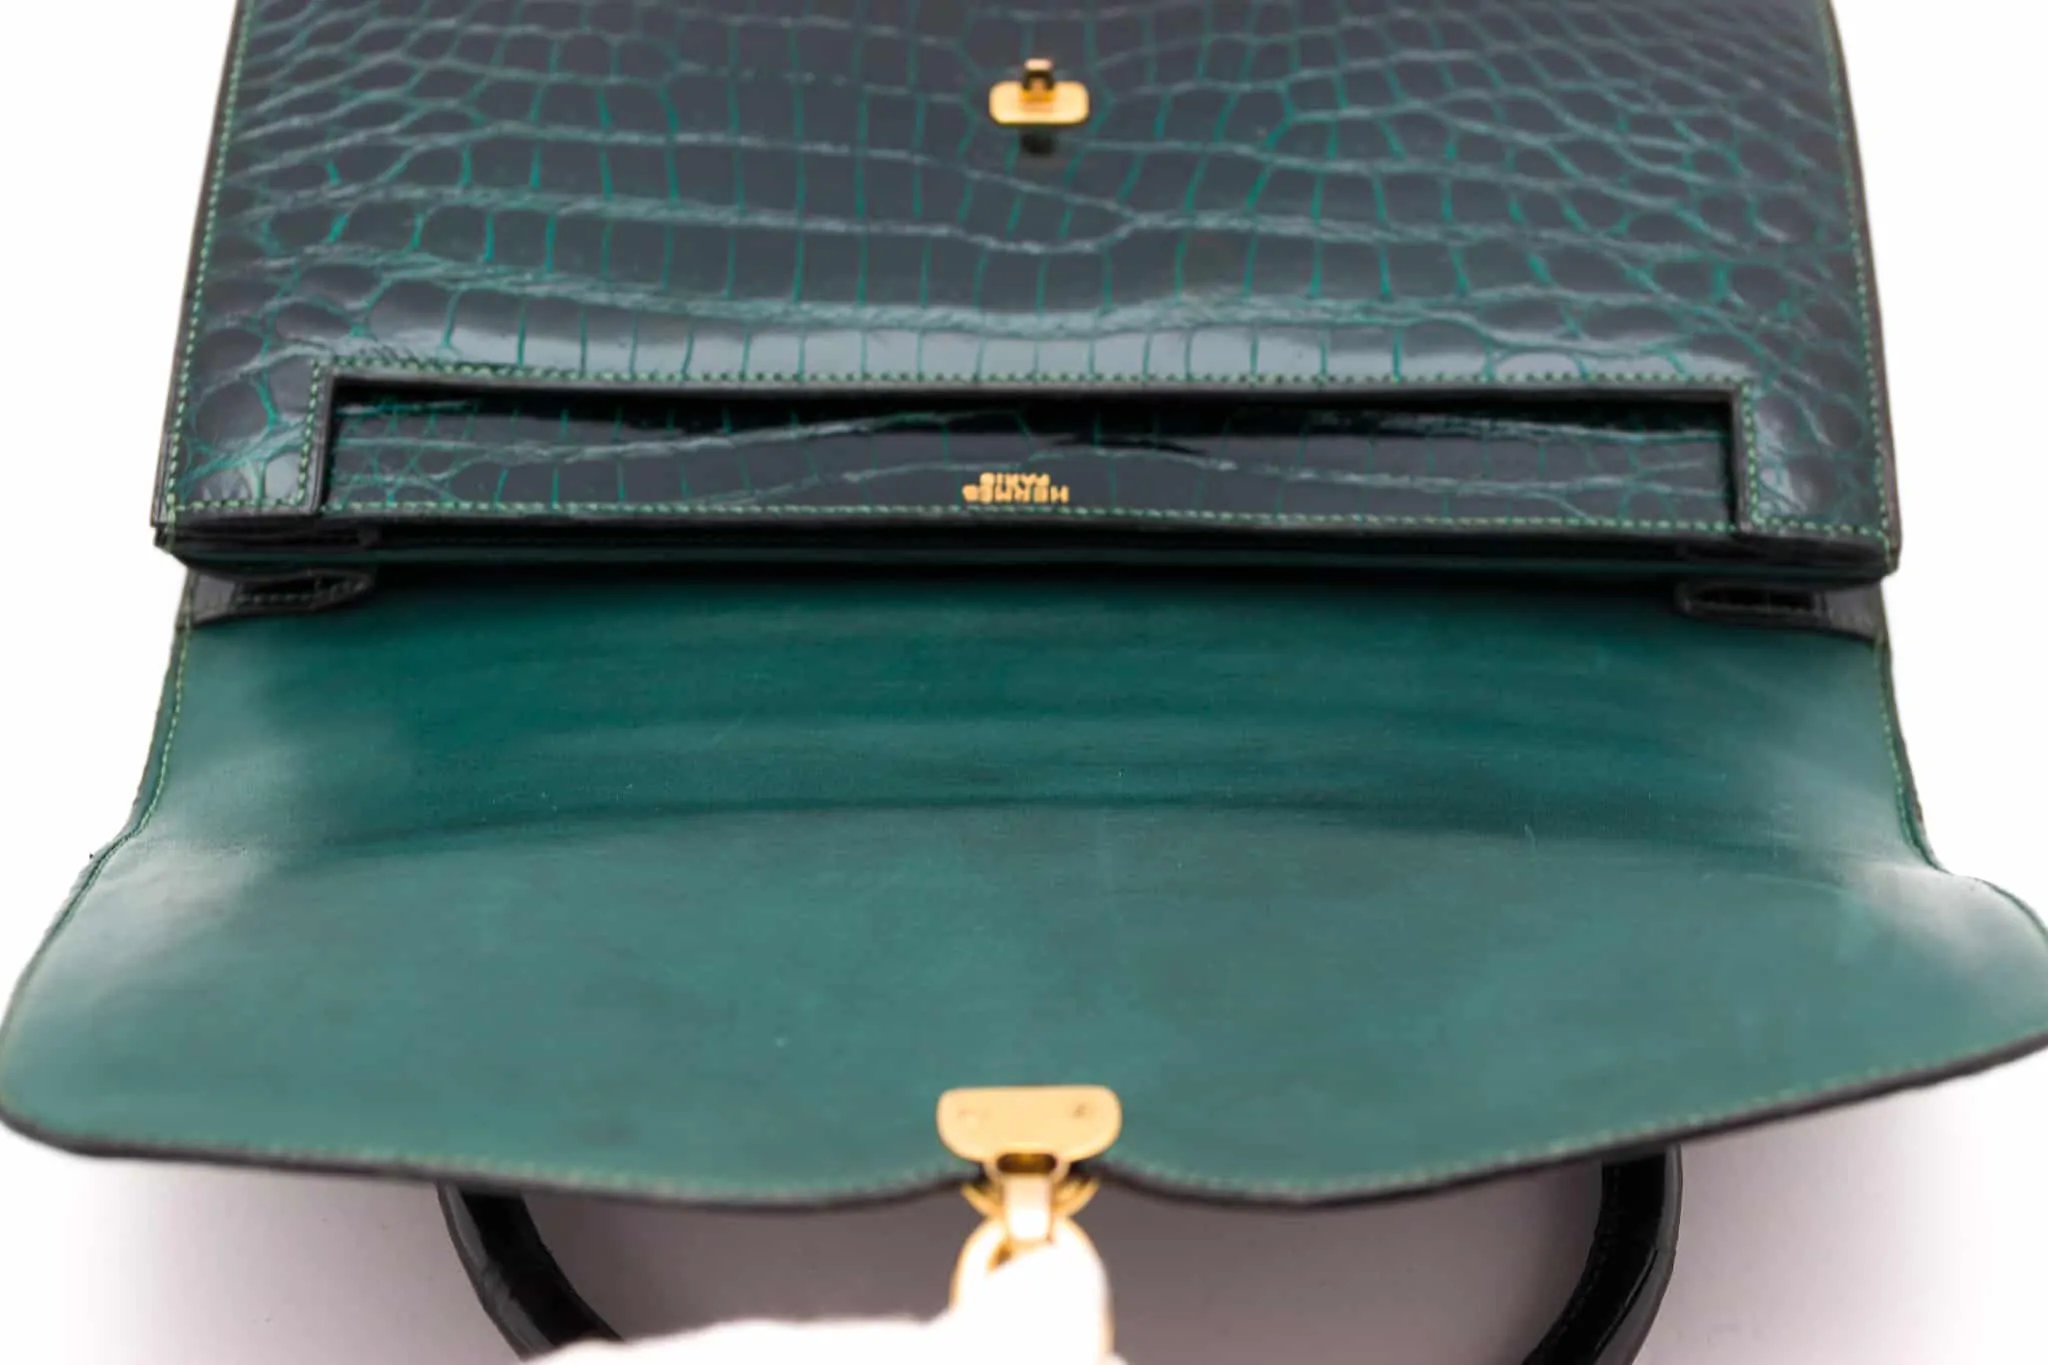 Hermes Kelly Chain Bag Box Leather Gold Hardware In Green